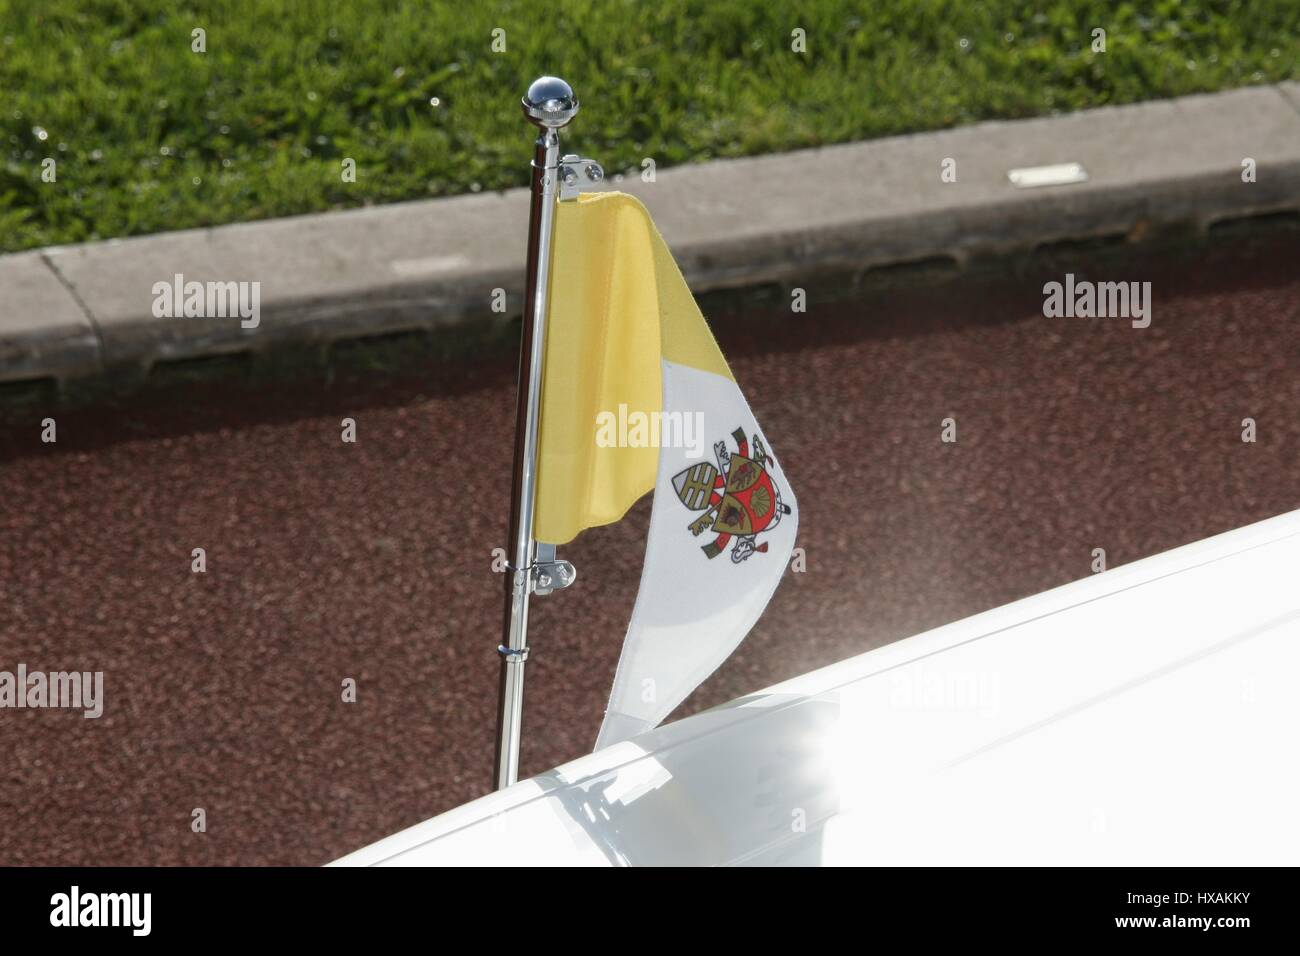 VATICAN FLAG ON POPE MOBILE THE POPE CAR 11 September 2006 ALTOTTING GERMANY Stock Photo